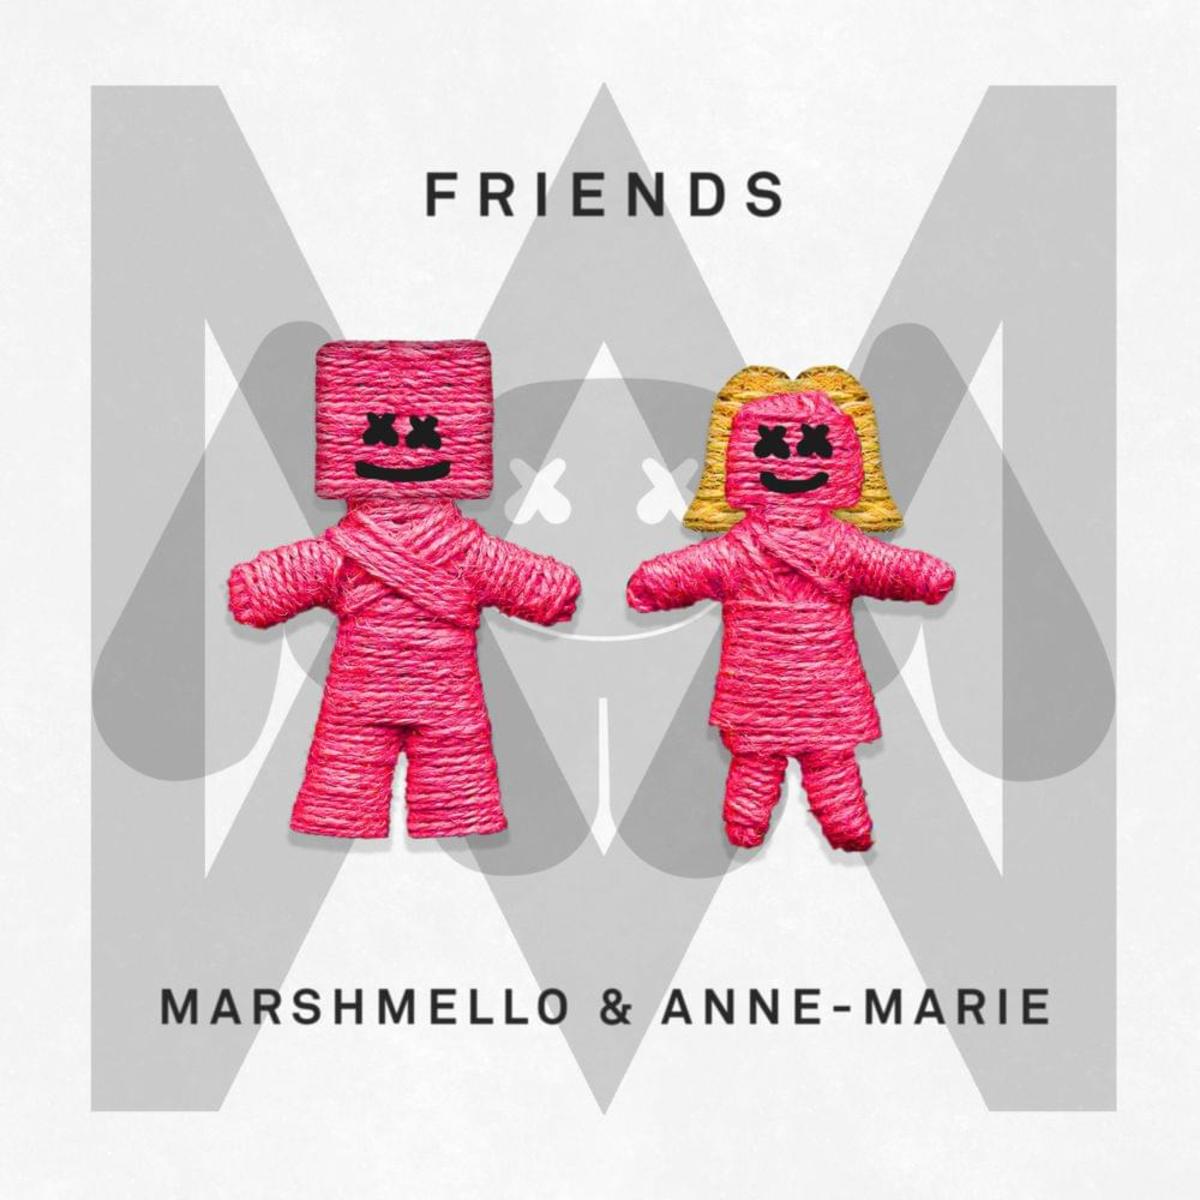 Top 5 Best Songs About People Stuck In The Friend Zone Spinditty Music - marshmello anne marie friends roblox music video